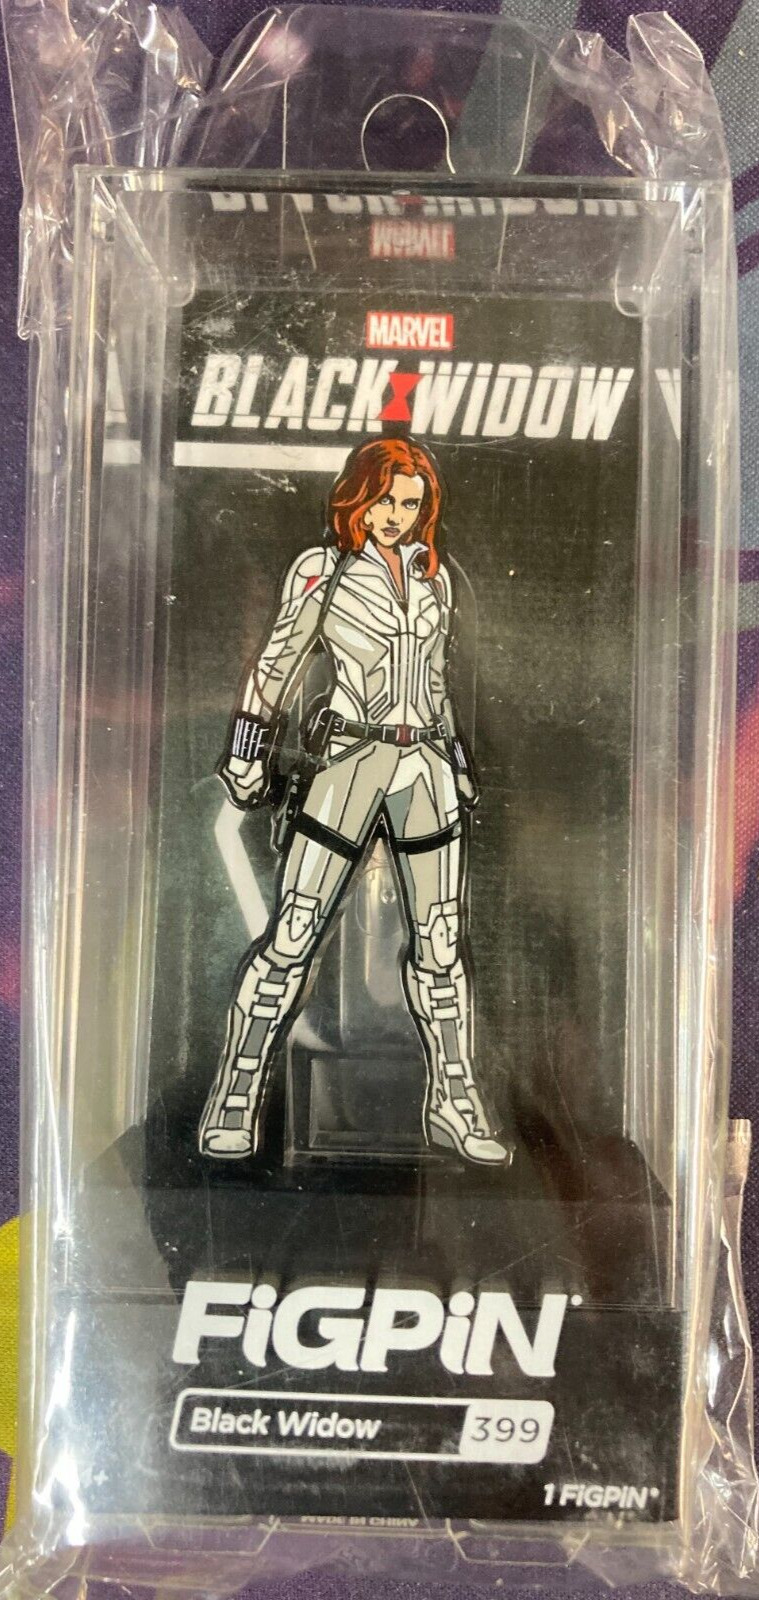 Figpin - 399 Black Widow in White, CHASE, MCU Avengers Marvel